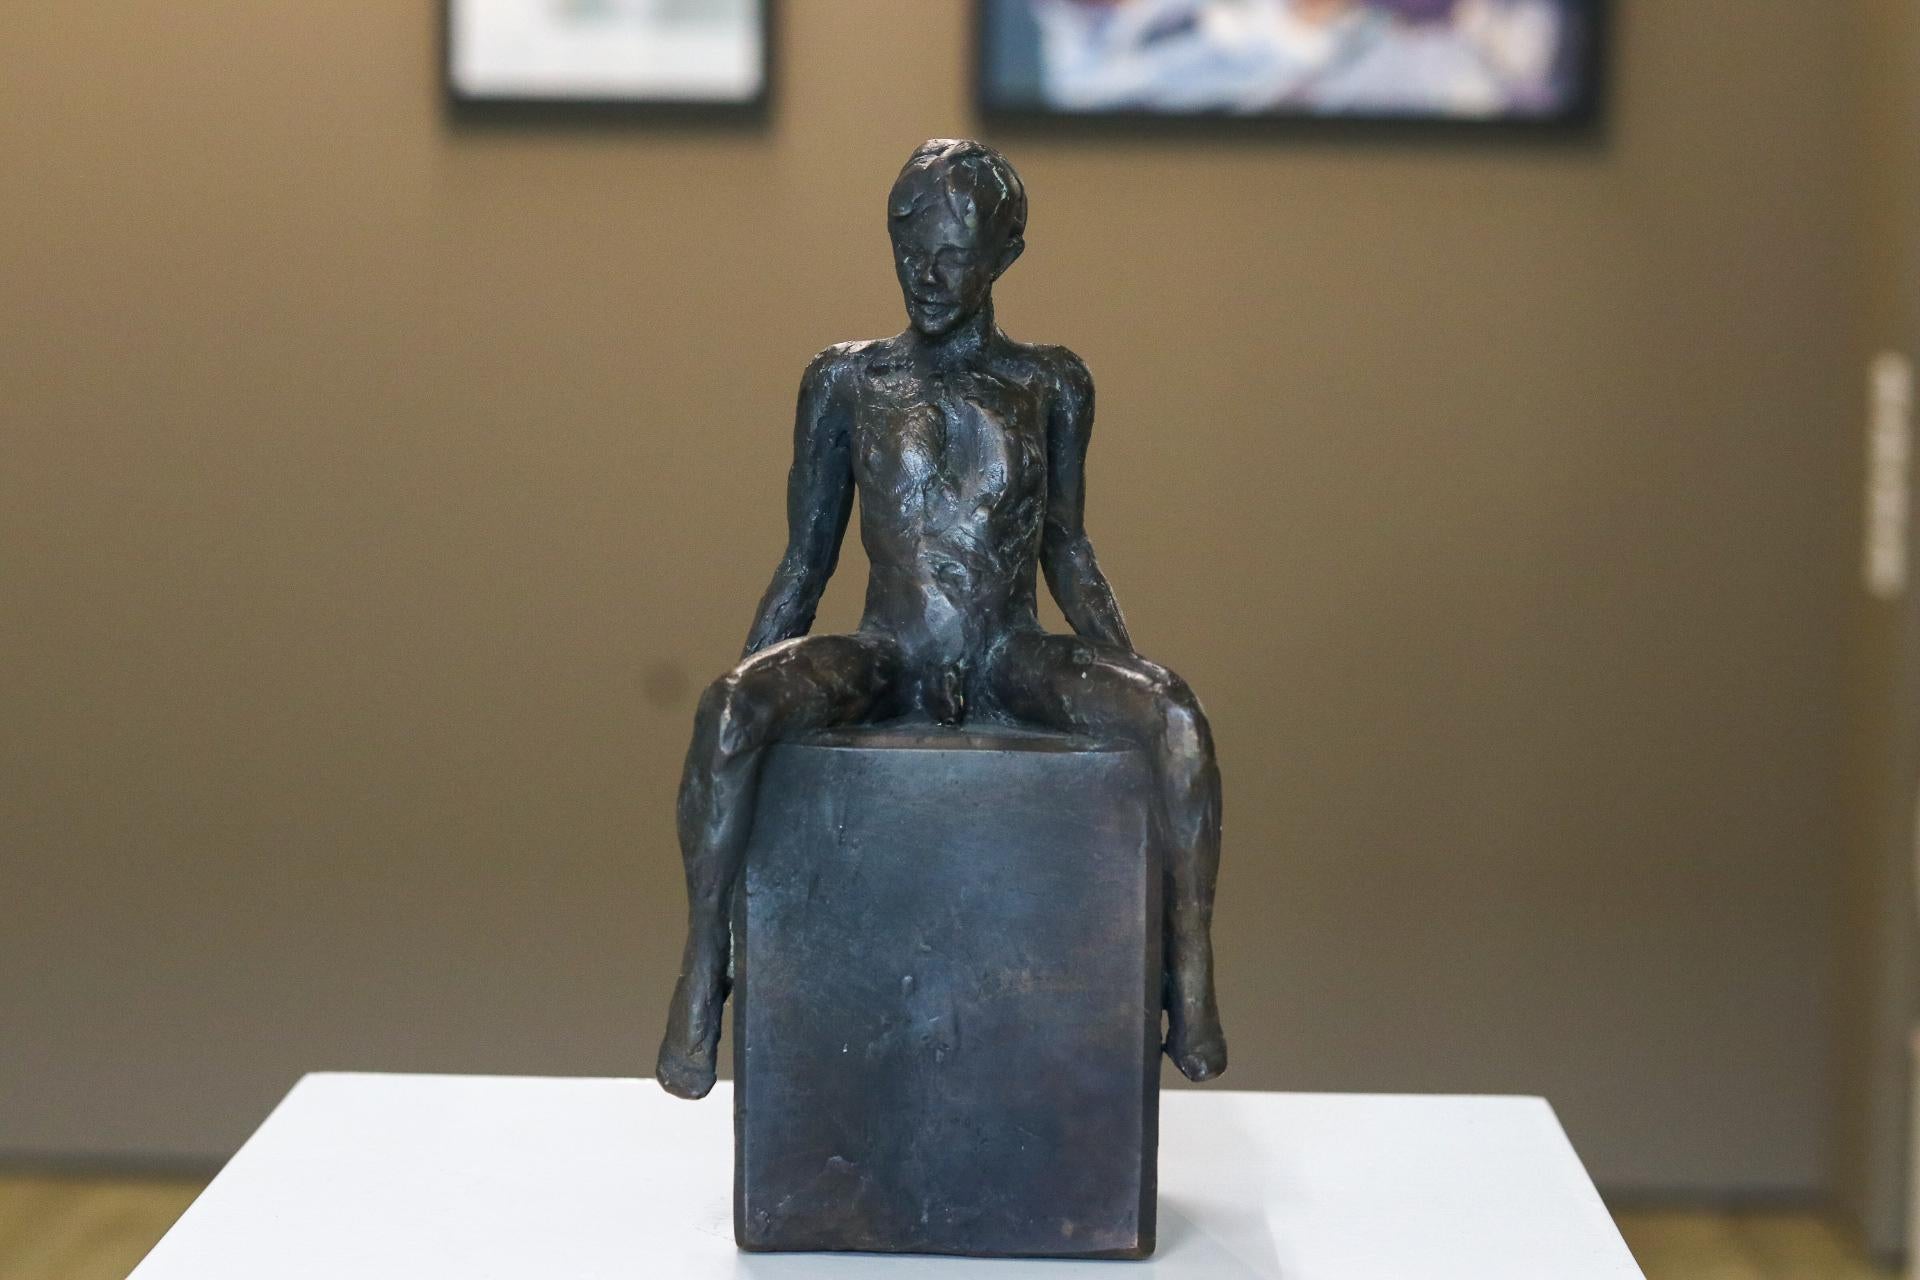 'Hans'
Bronze sculpture on pedestal of Blue Stone
Hight 22 cm

The North Holland female sculptor Romee Kanis prefers to make her bronze sculptures 'from life'. 

Her sculptures are now life-sized in many municipalities, precisely because of the